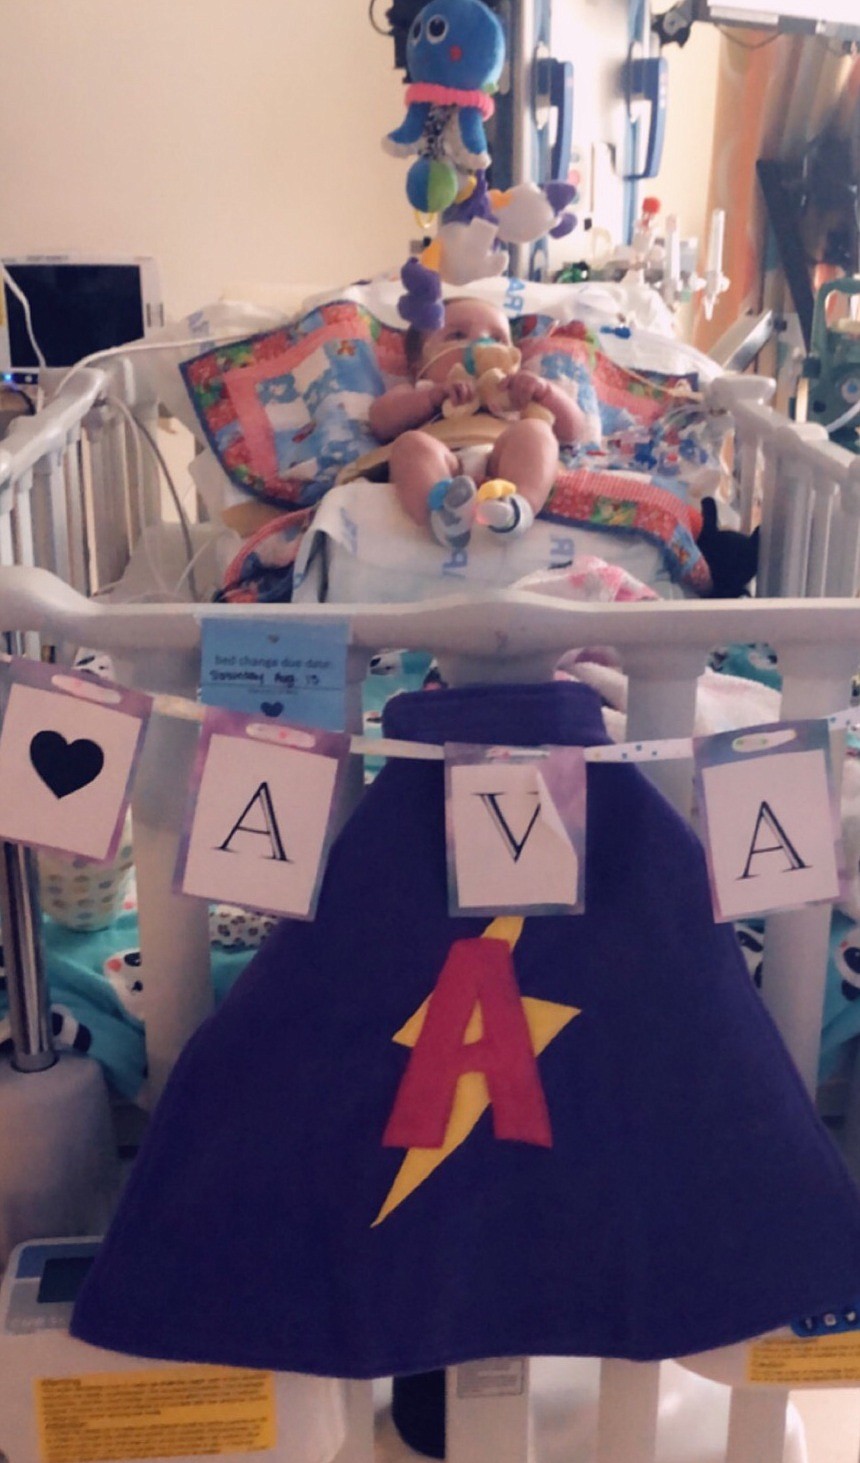 Ava Jaymes Stemhagen was hospitalized while waiting for her new heart